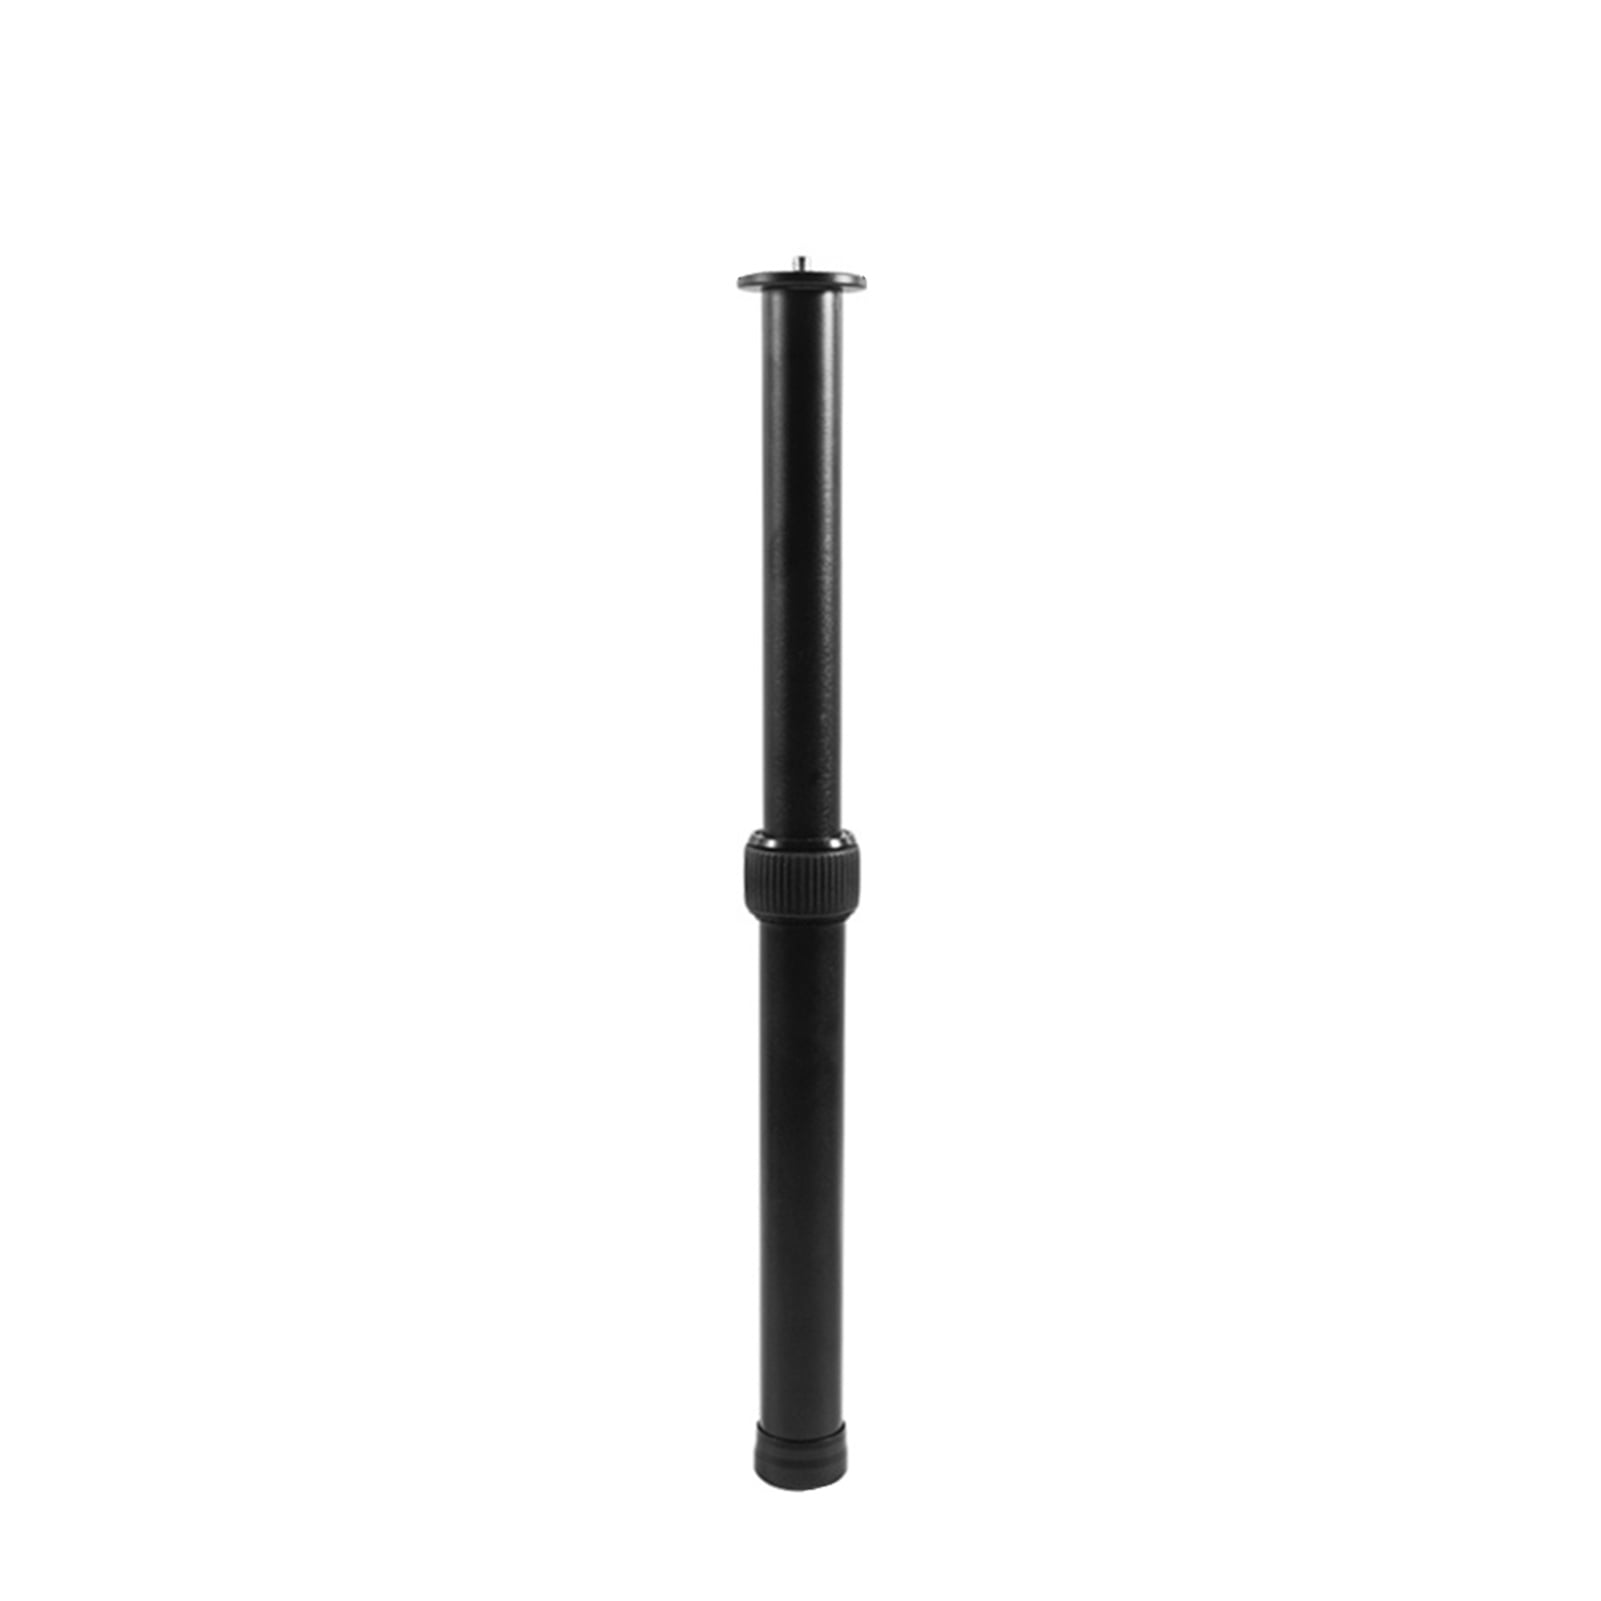 suction rods tools SODIAL 1pcs Universal Magnet Strong Suction Telescopic Extension Rod with Lights pickup for Suction screw nut tools